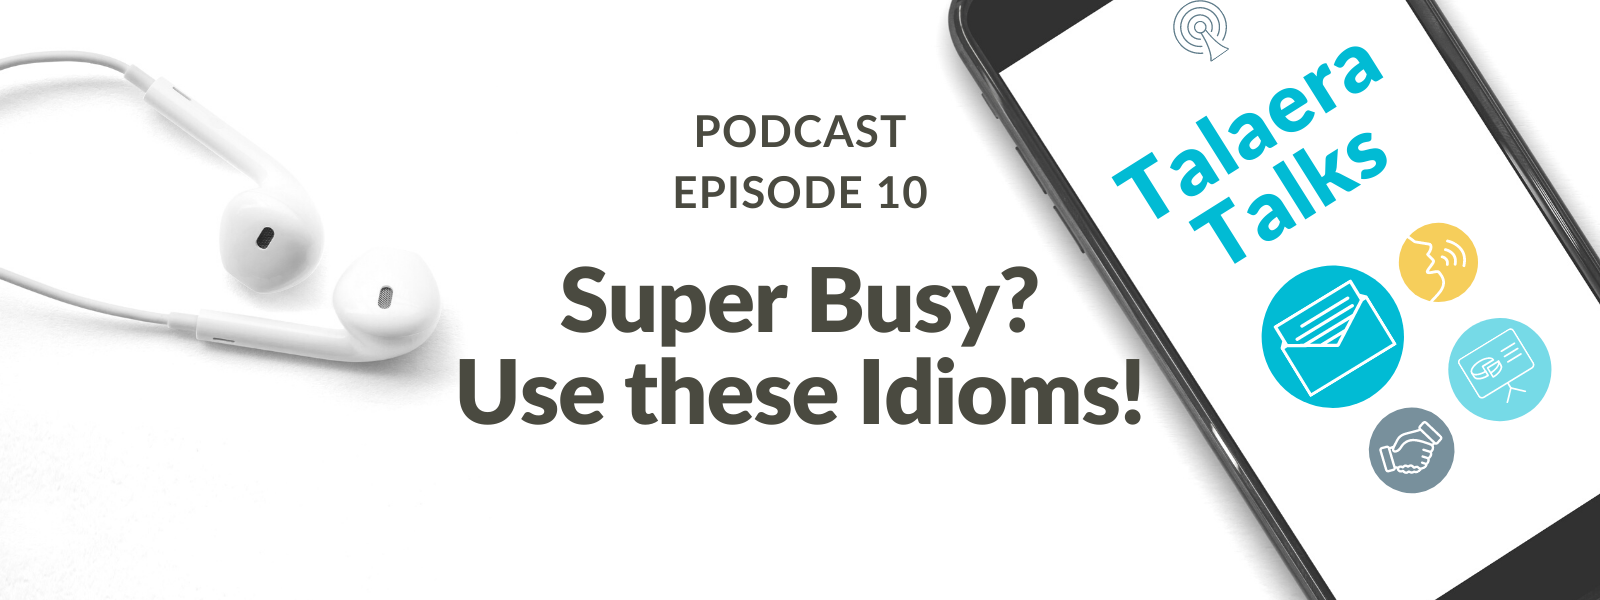 Are you Super Busy? Use These 8 English Idioms! [Podcast]